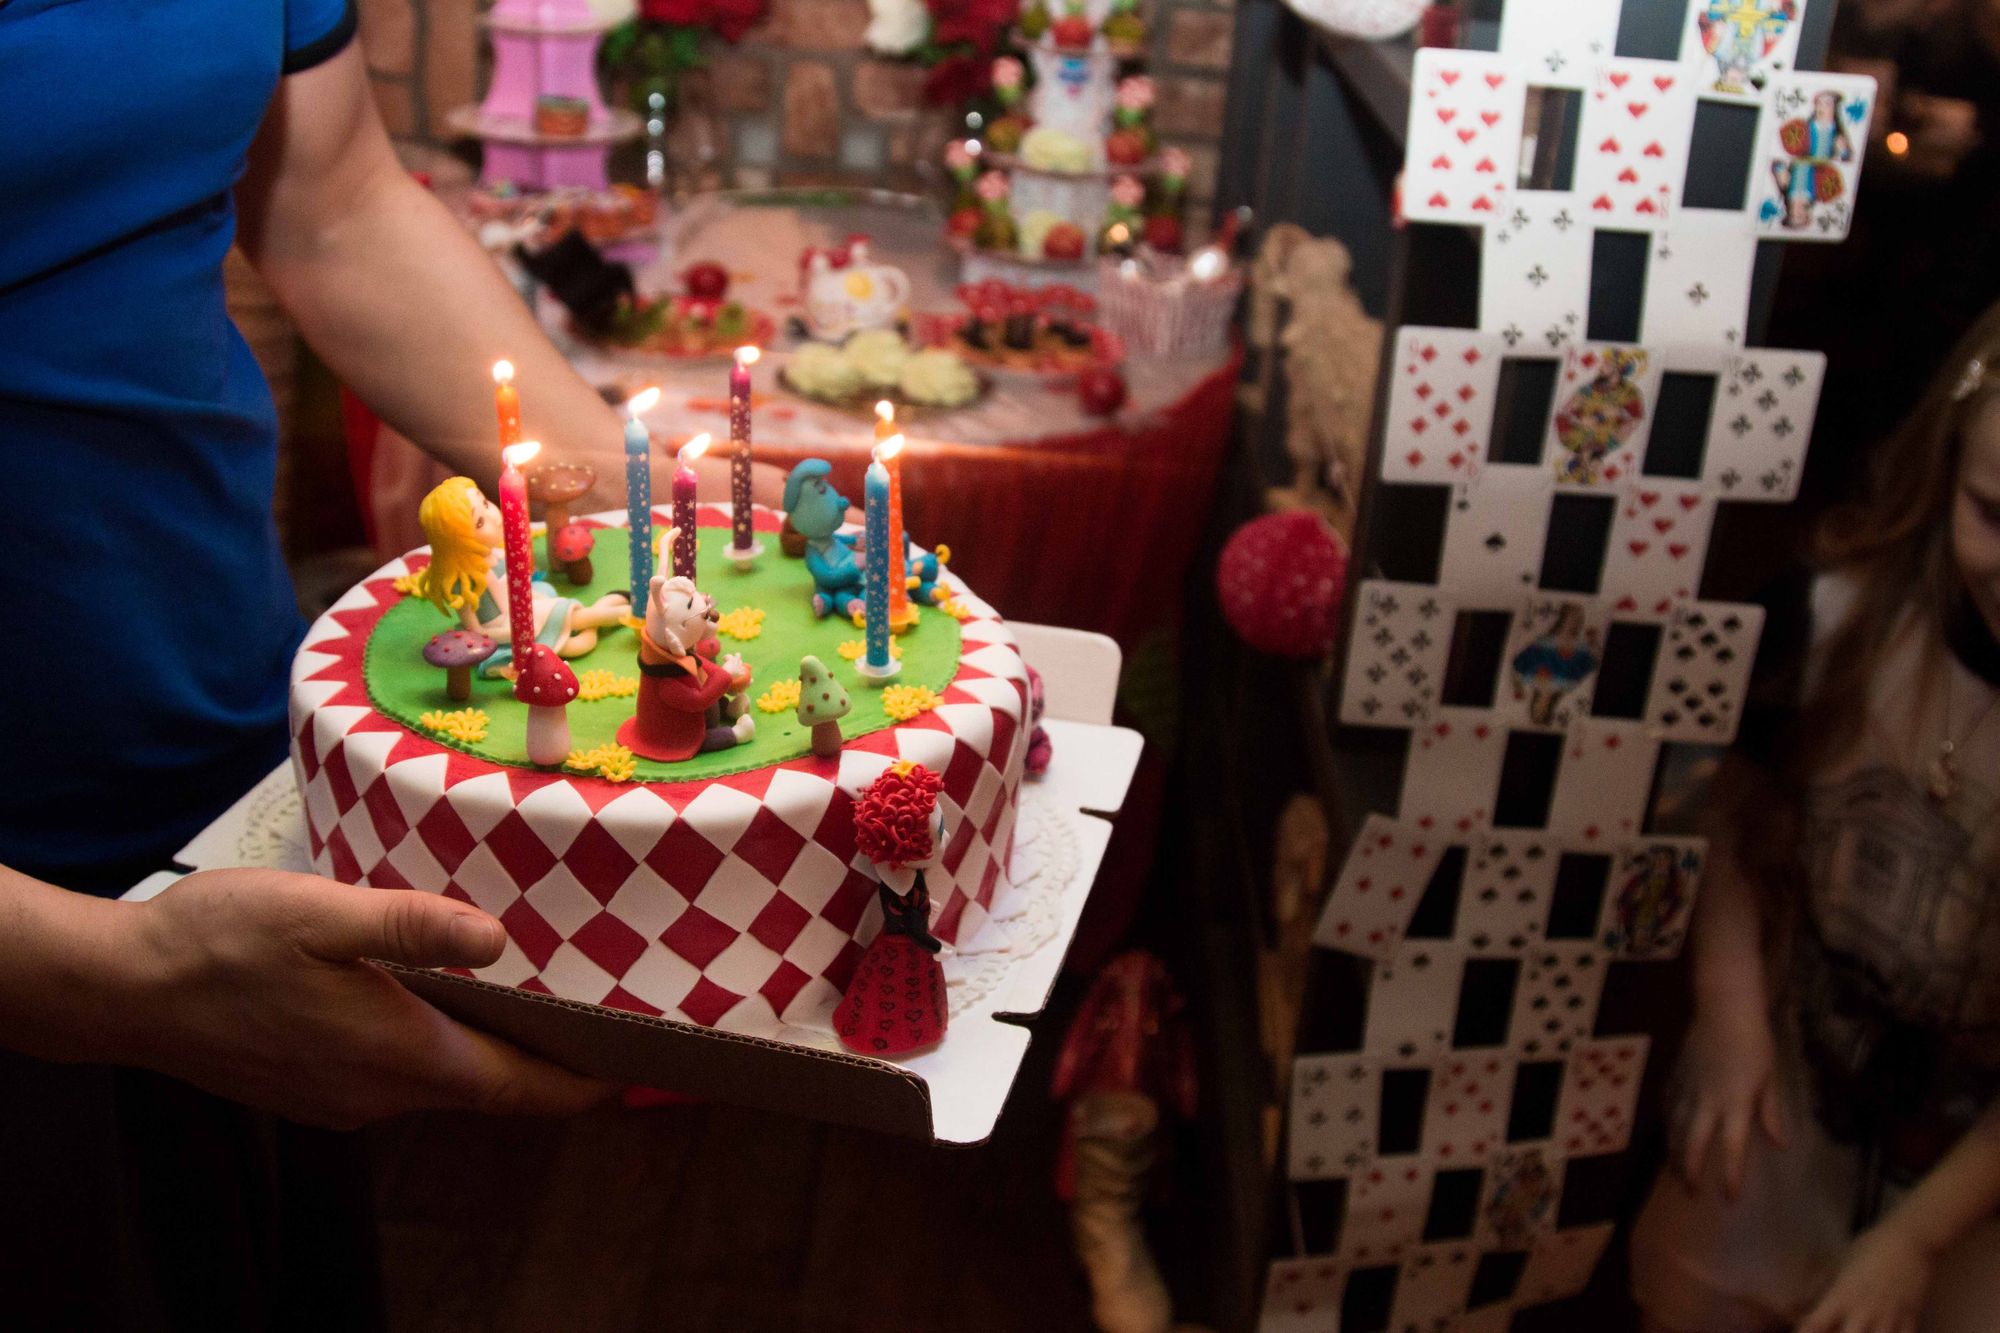 How to Plan an Alice in Wonderland Tea Party with Themed Food, Drinks,  Decorations & Activities 